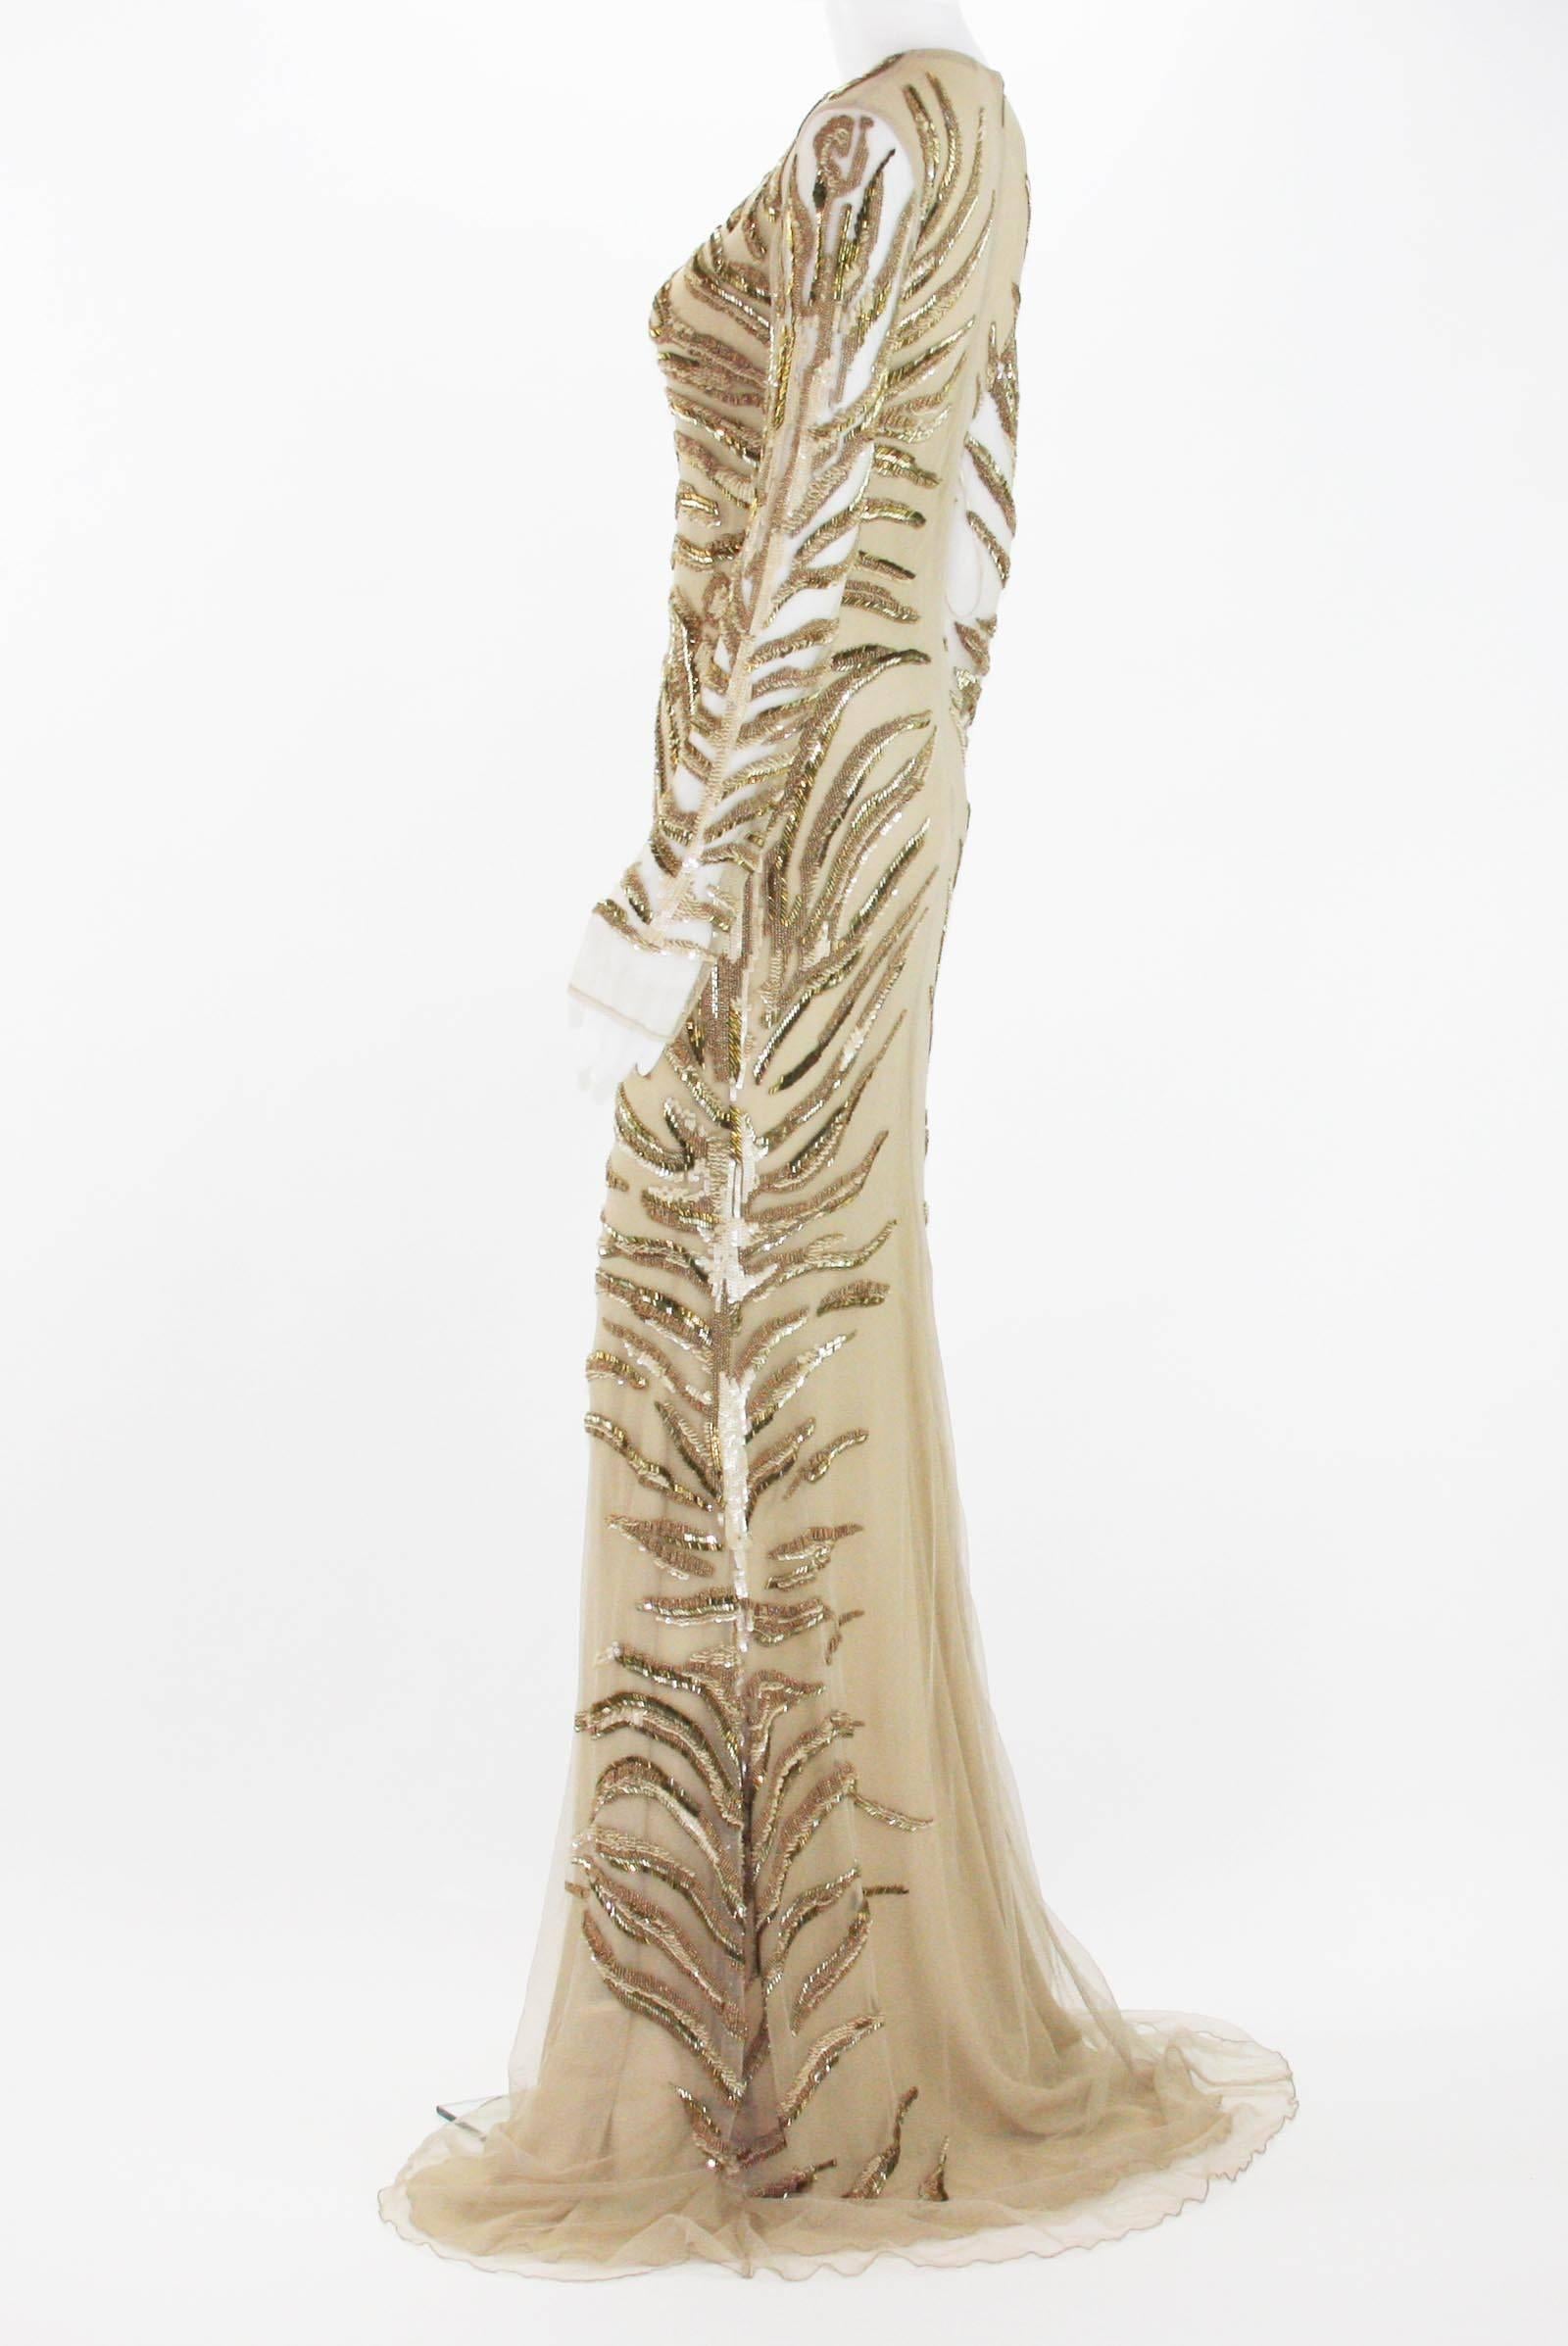 New Roberto Cavalli Nude Beaded Embroidery Mesh Dress Gown size 40 1